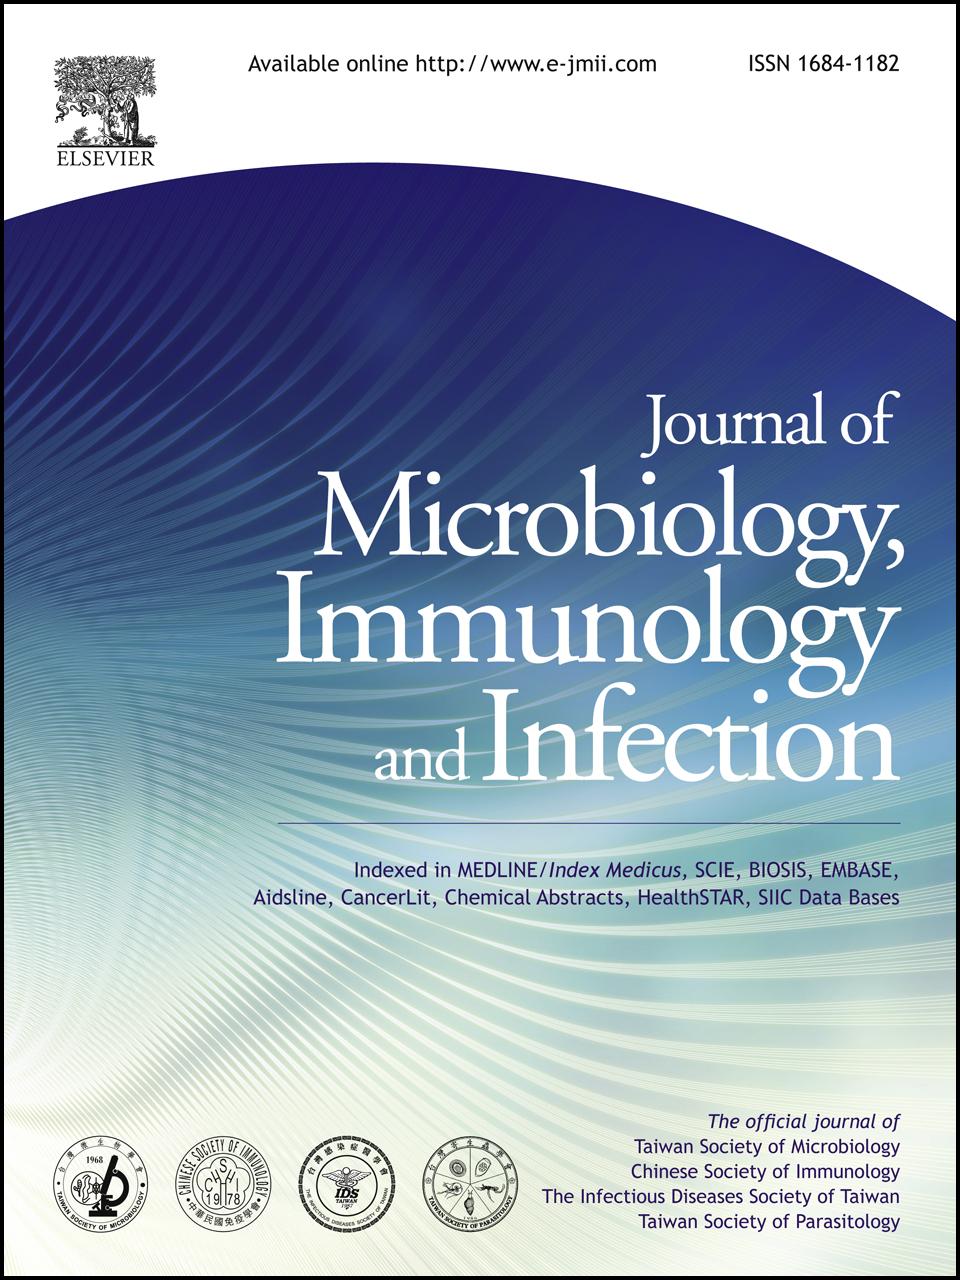 Accepted Manuscript Honey: A realistic antimicrobial for disorders of the skin Pauline McLoone, Mary Warnock, Dr. Lorna Fyfe PII: S1684-1182(15)00033-X DOI: 10.1016